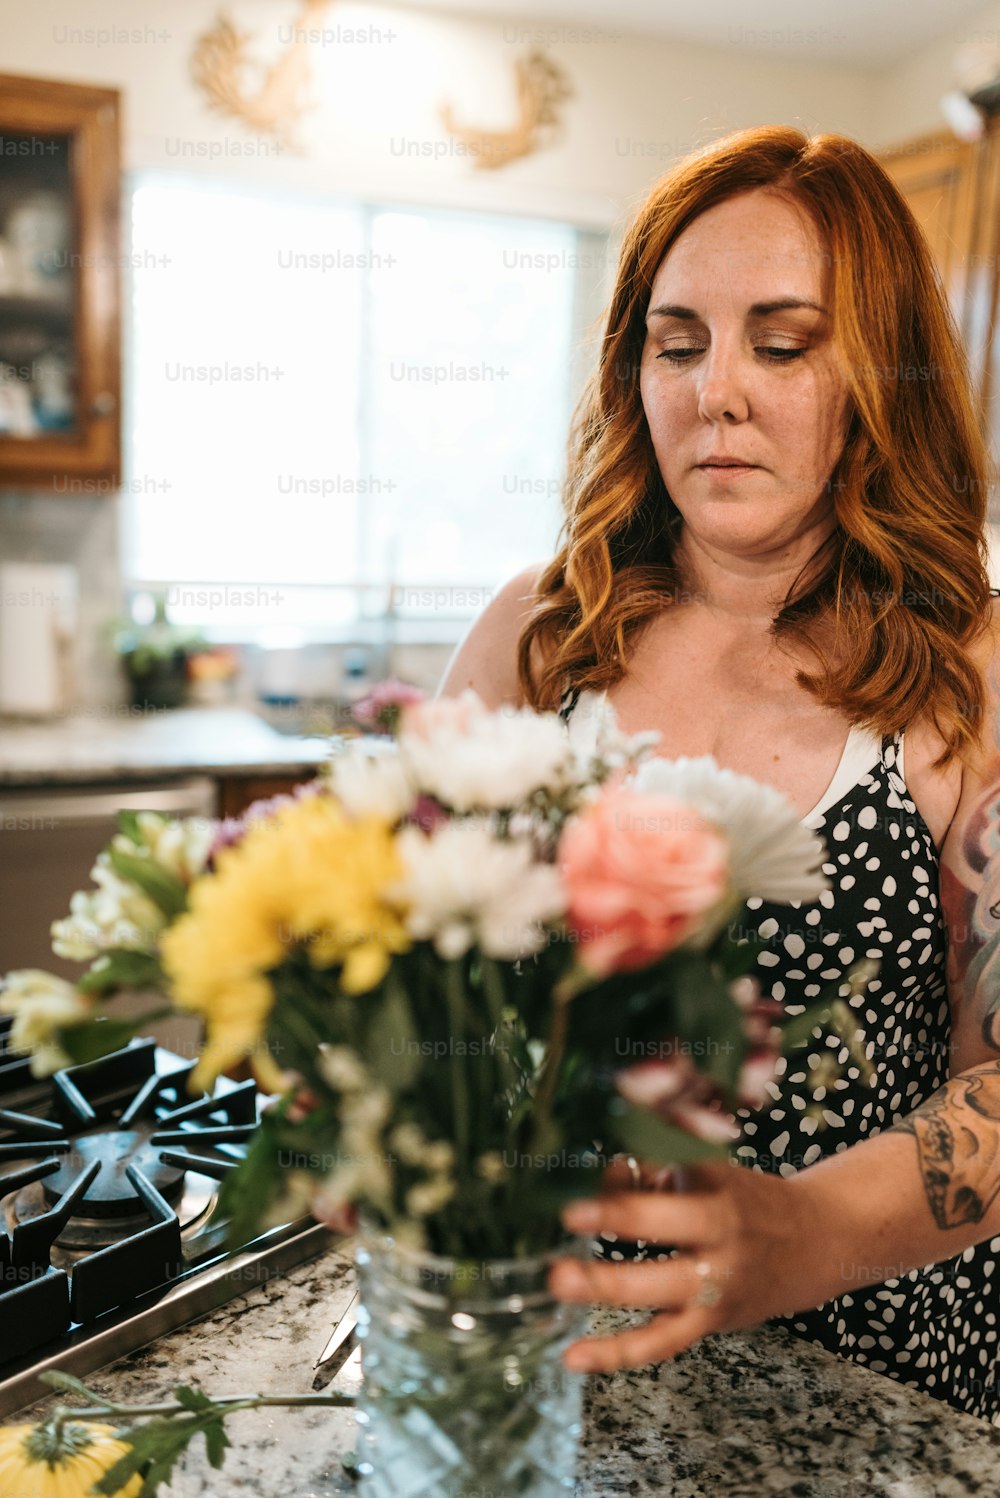 a woman arranging flowers in a vase on a kitchen counter